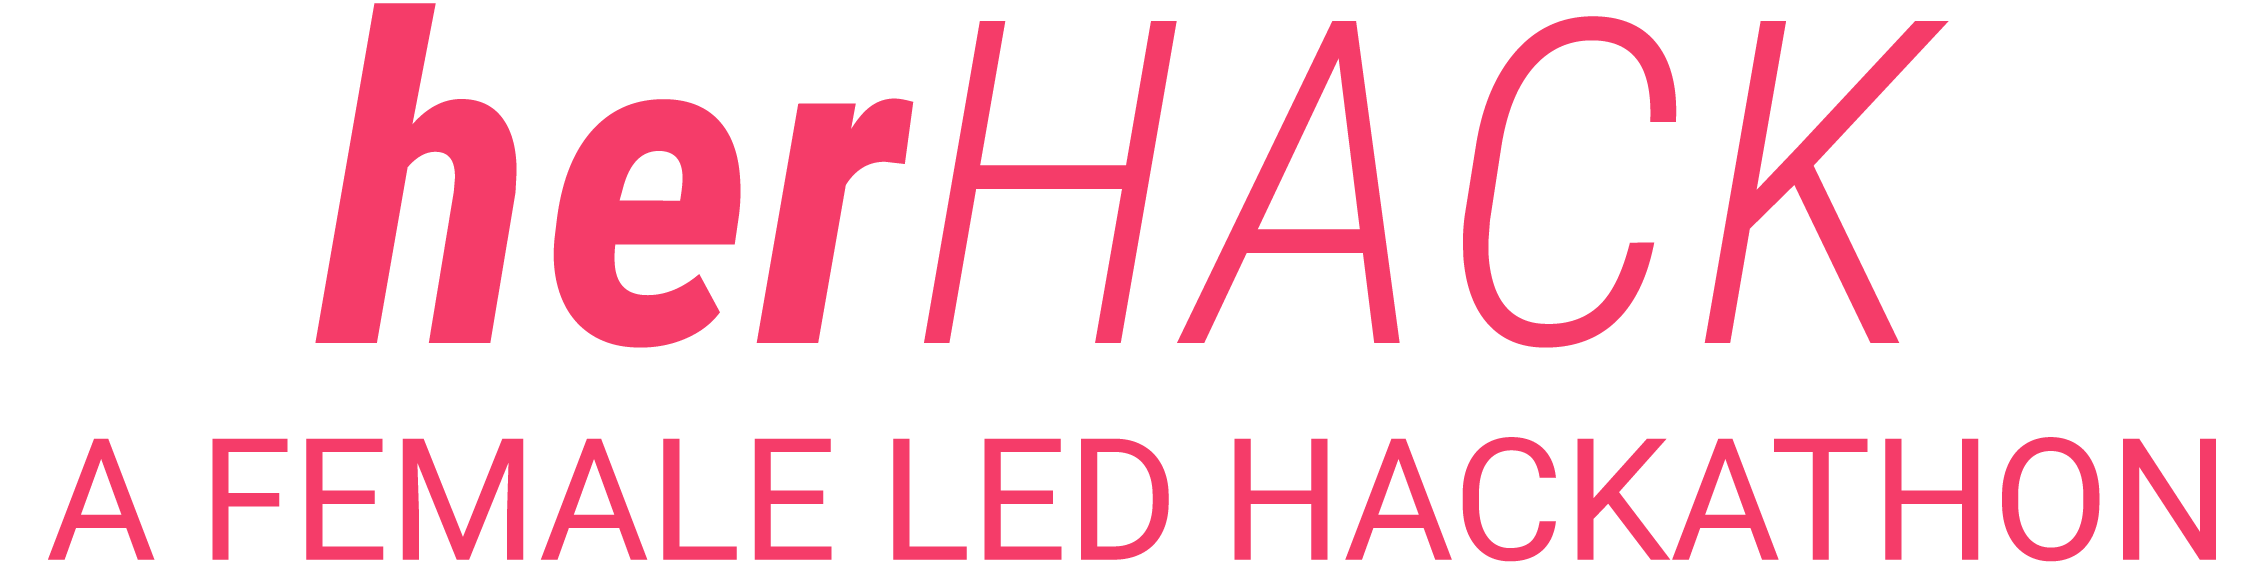 herHACK - the first female-led hackthon